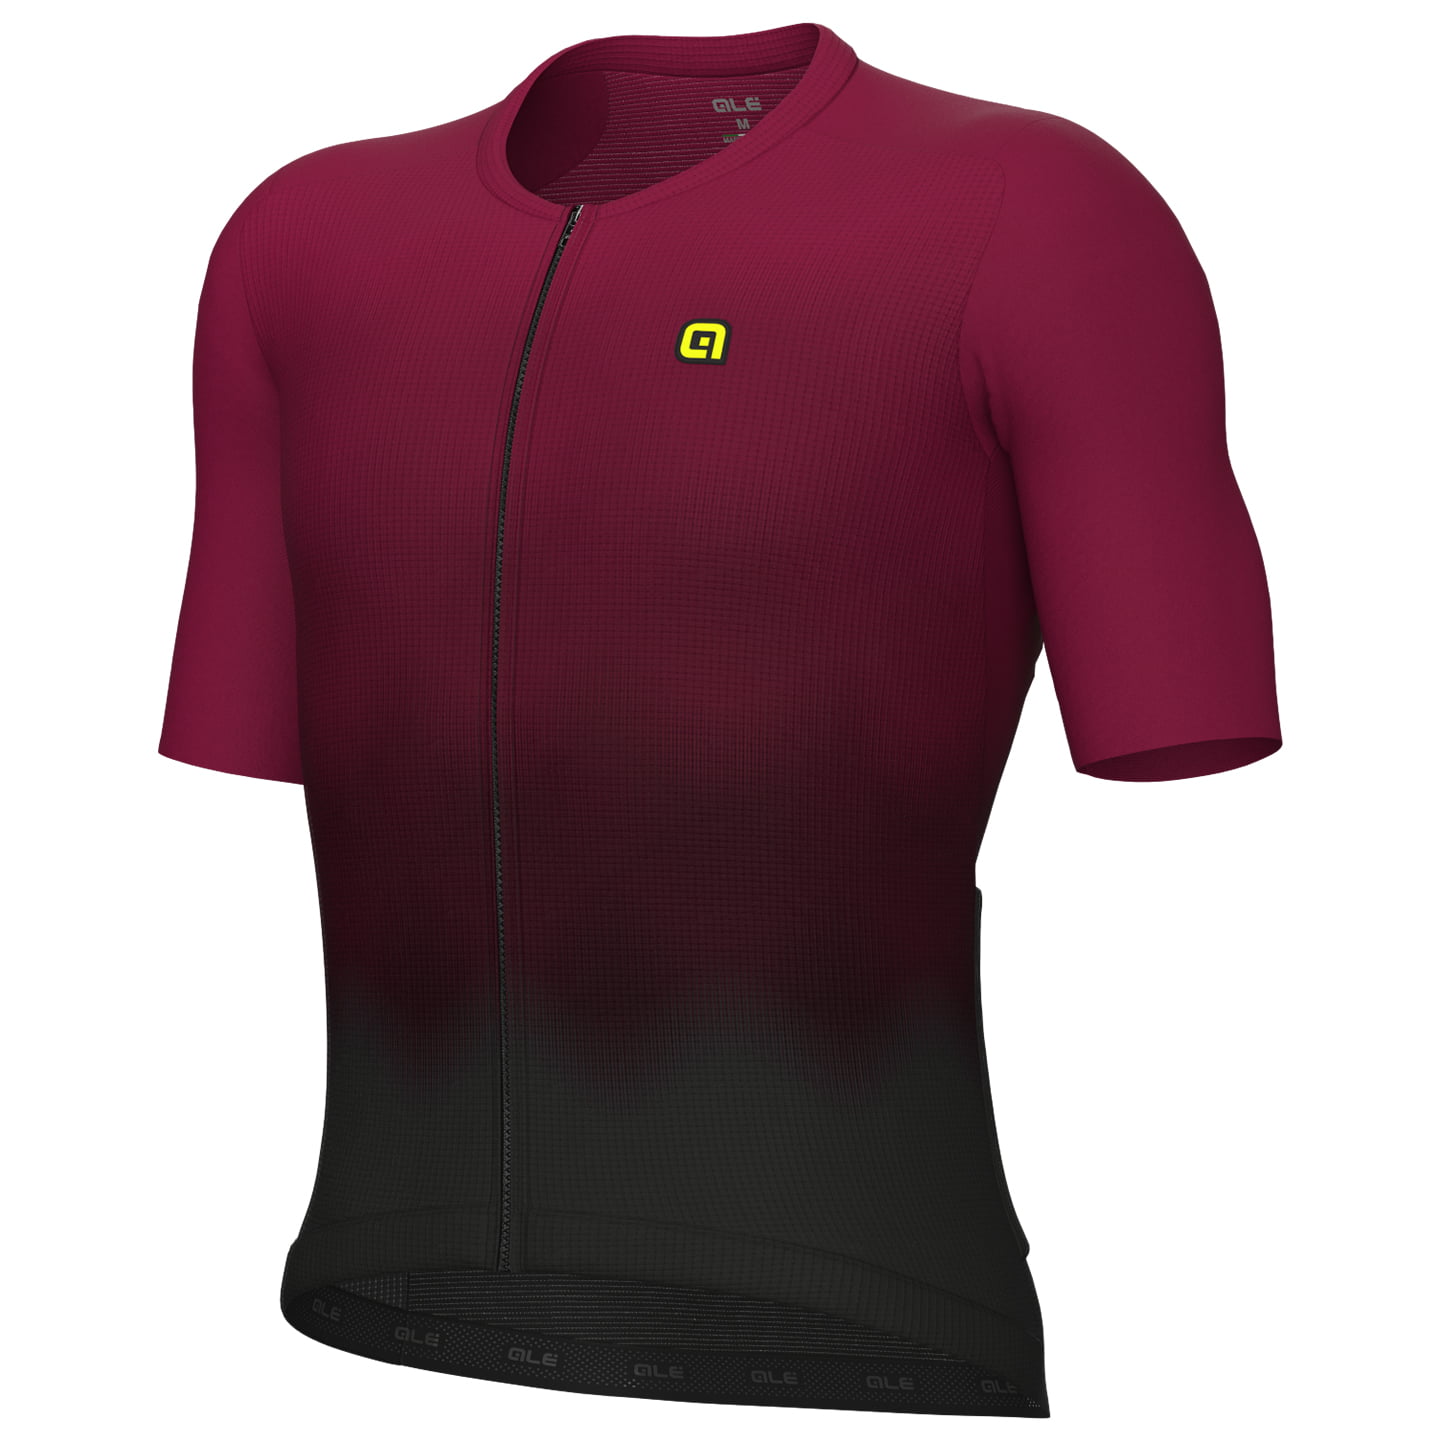 ALE Velocity 2.0 Short Sleeve Jersey, for men, size S, Cycling jersey, Cycling clothing